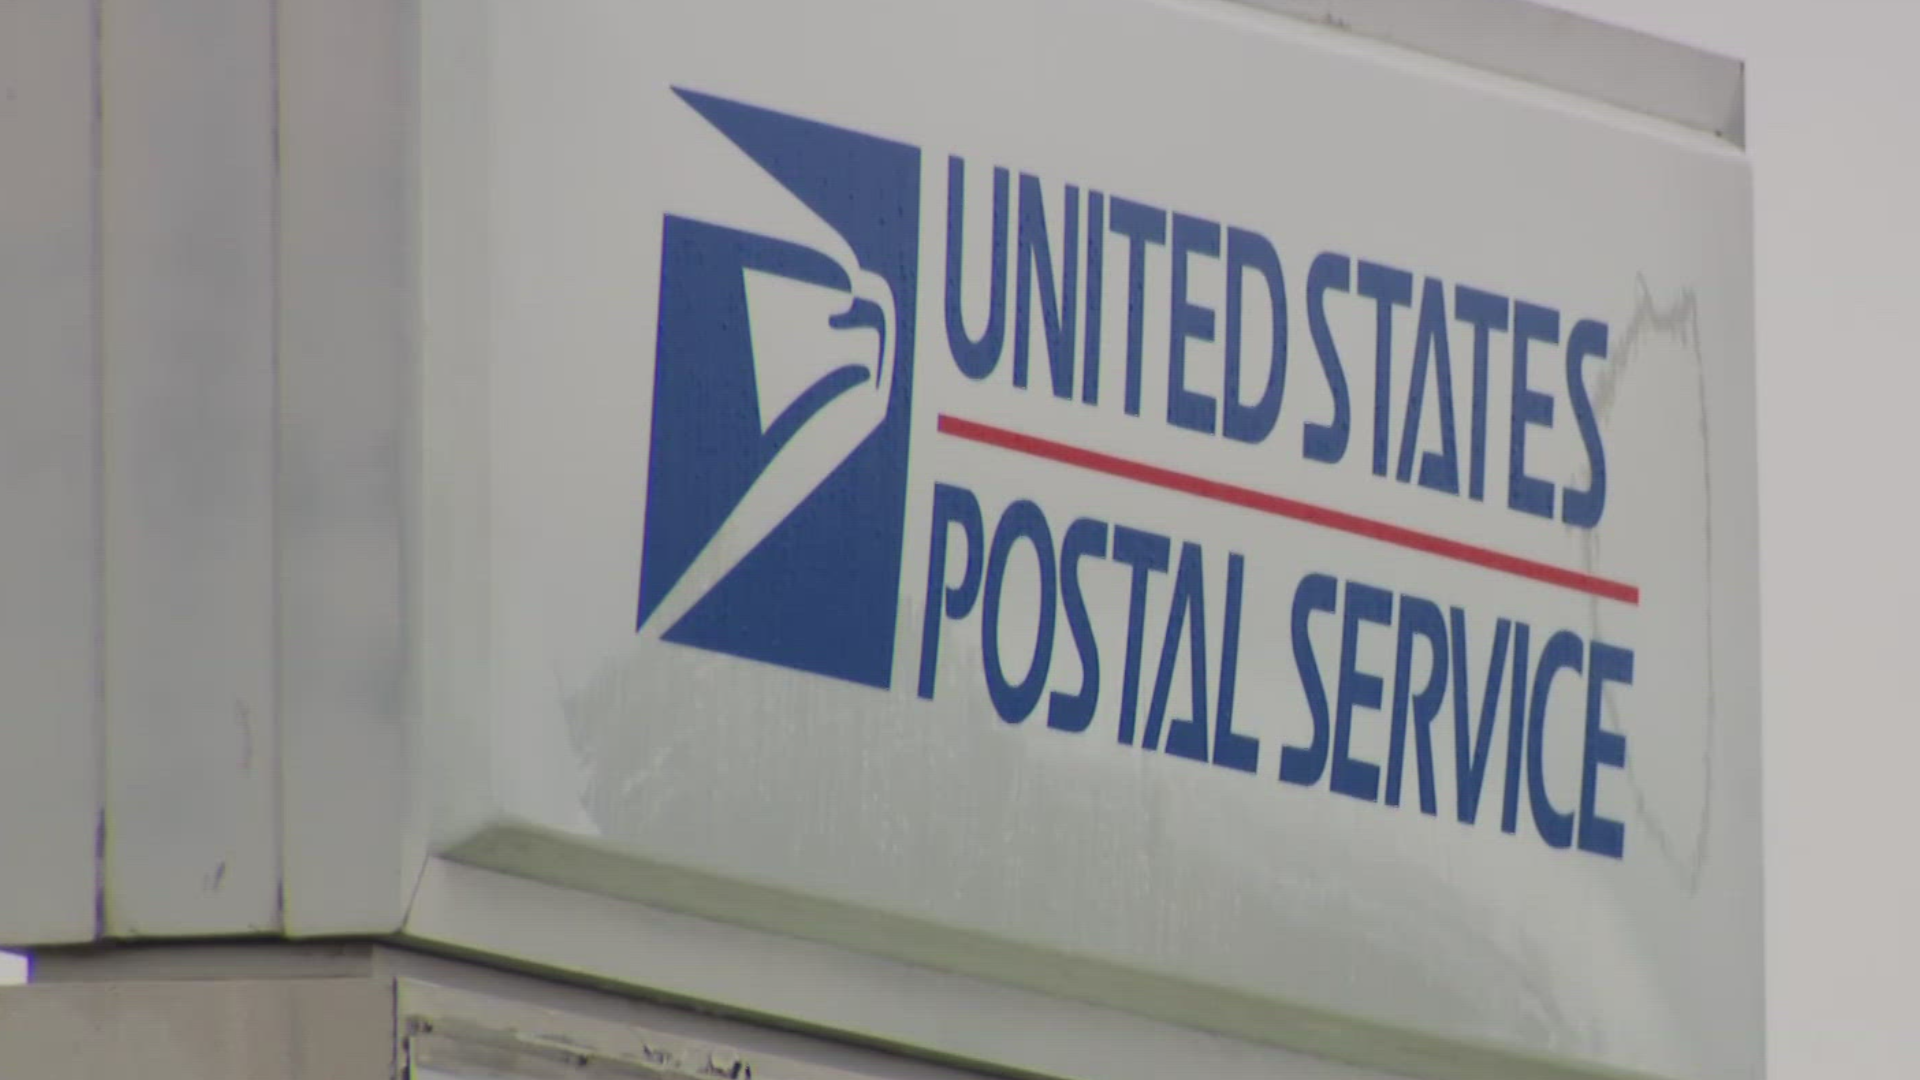 Postal workers will protest outside of the Eagan post office Saturday to call attention to staffing shortages and what they call "hostile" conditions.